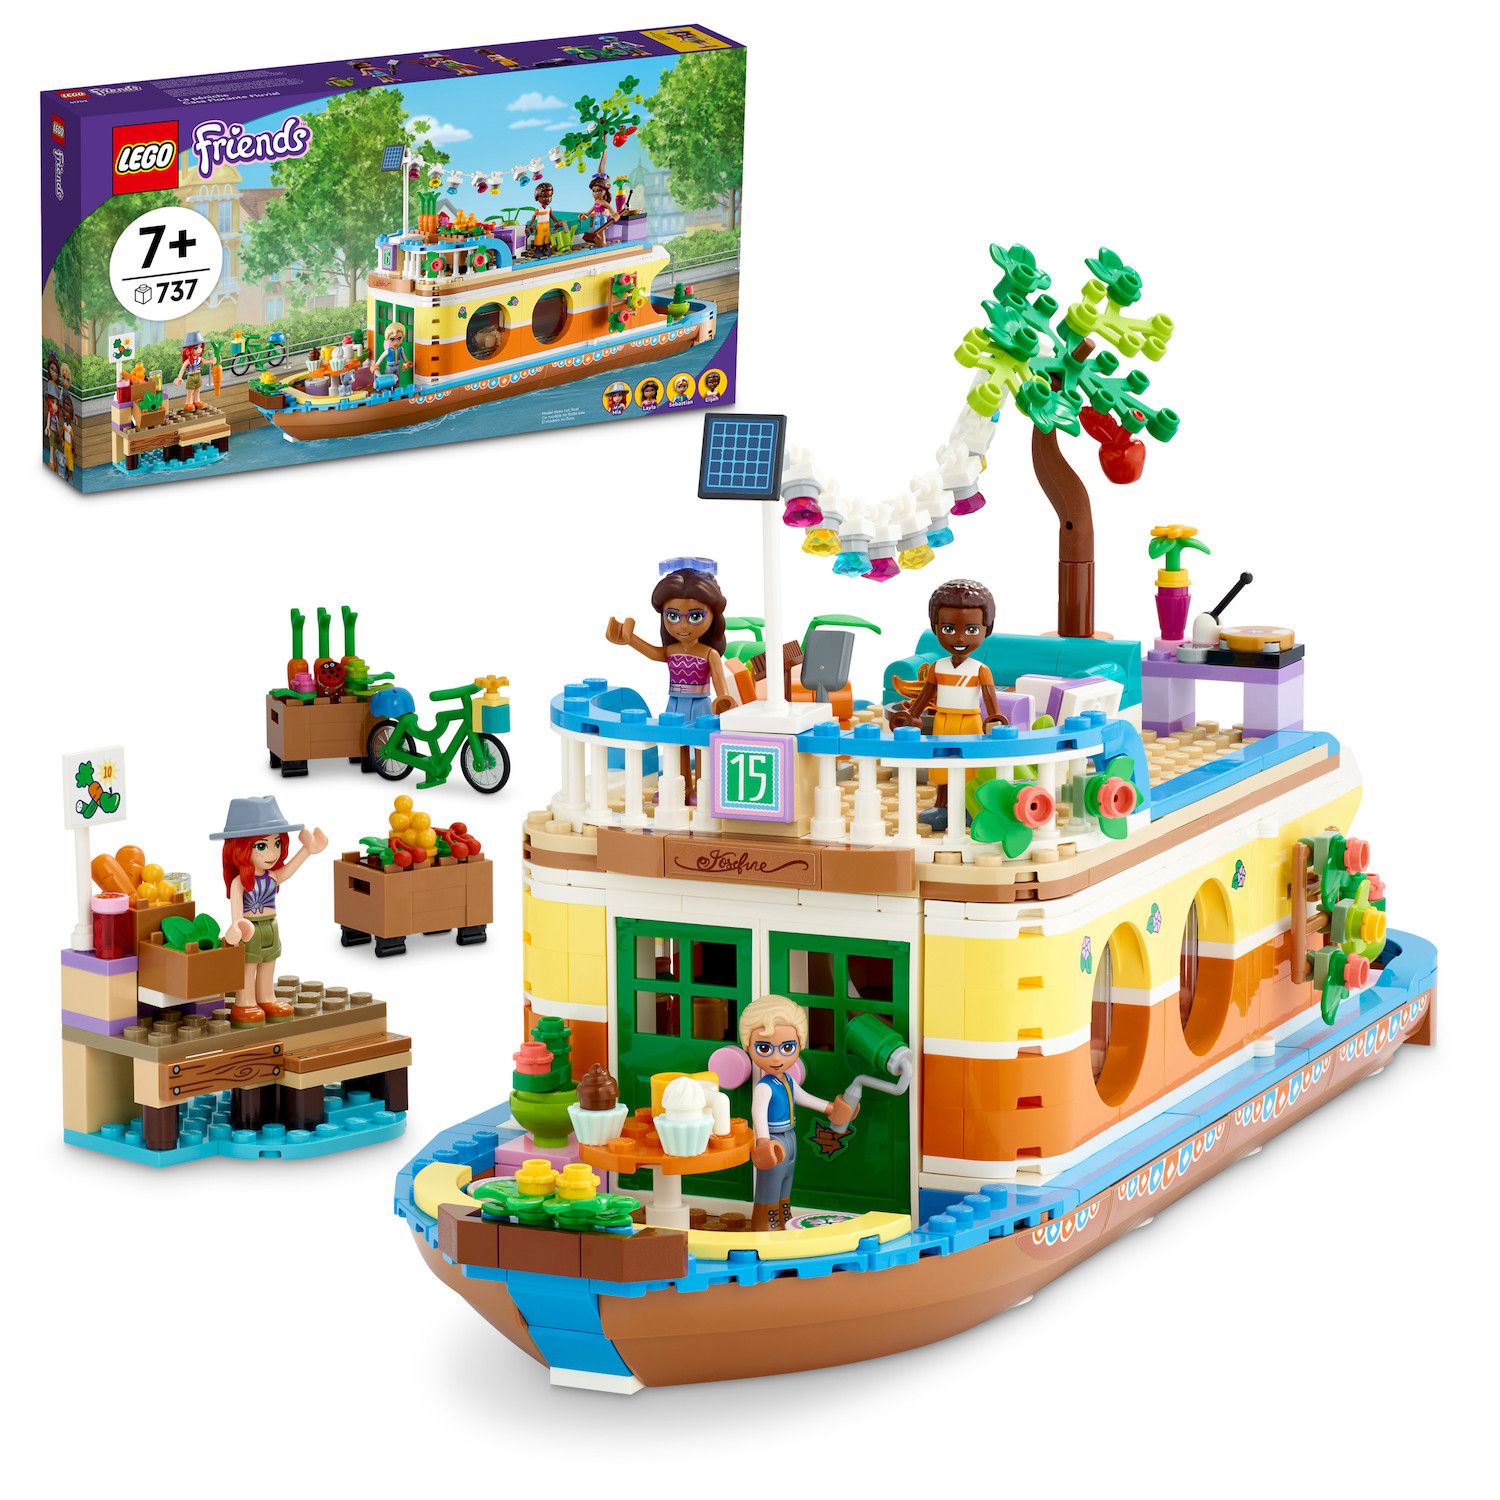 Image for LEGO Friends Canal Houseboat 41702 Building Kit (737 Pieces) at Kohl's.